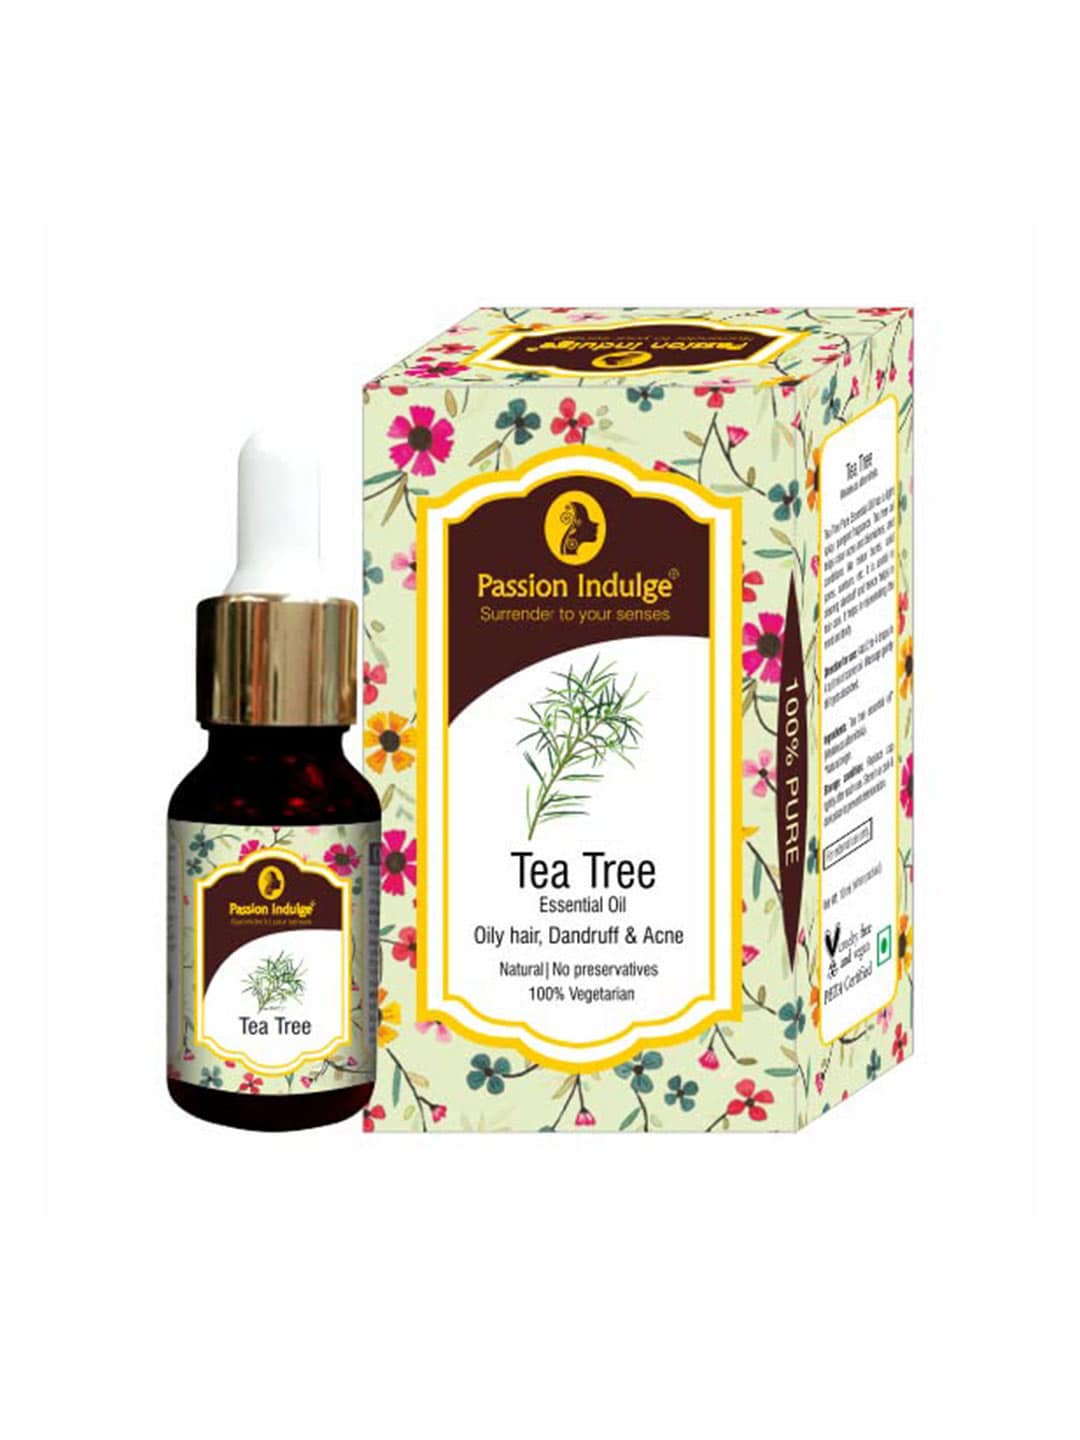 Passion Indulge Pure Tea Tree Essential Oil For Dandruff & Oily Hair Price in India